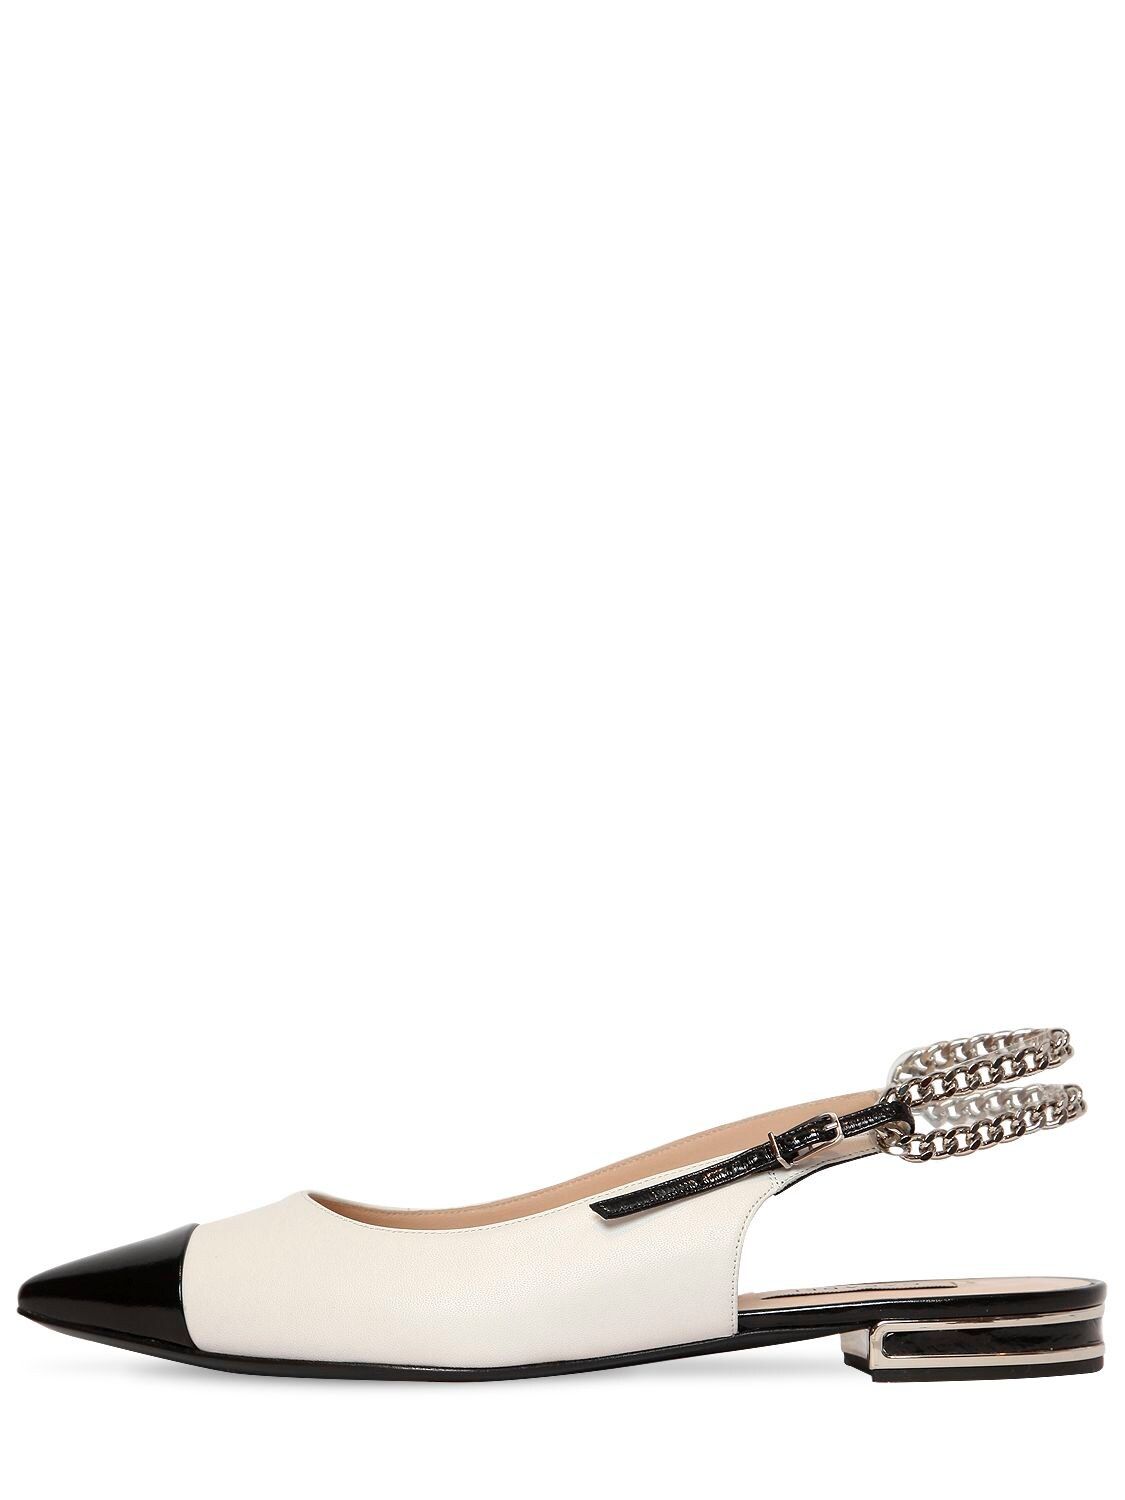 10mm Chained Leather Sling Back Flats | Luisaviaroma